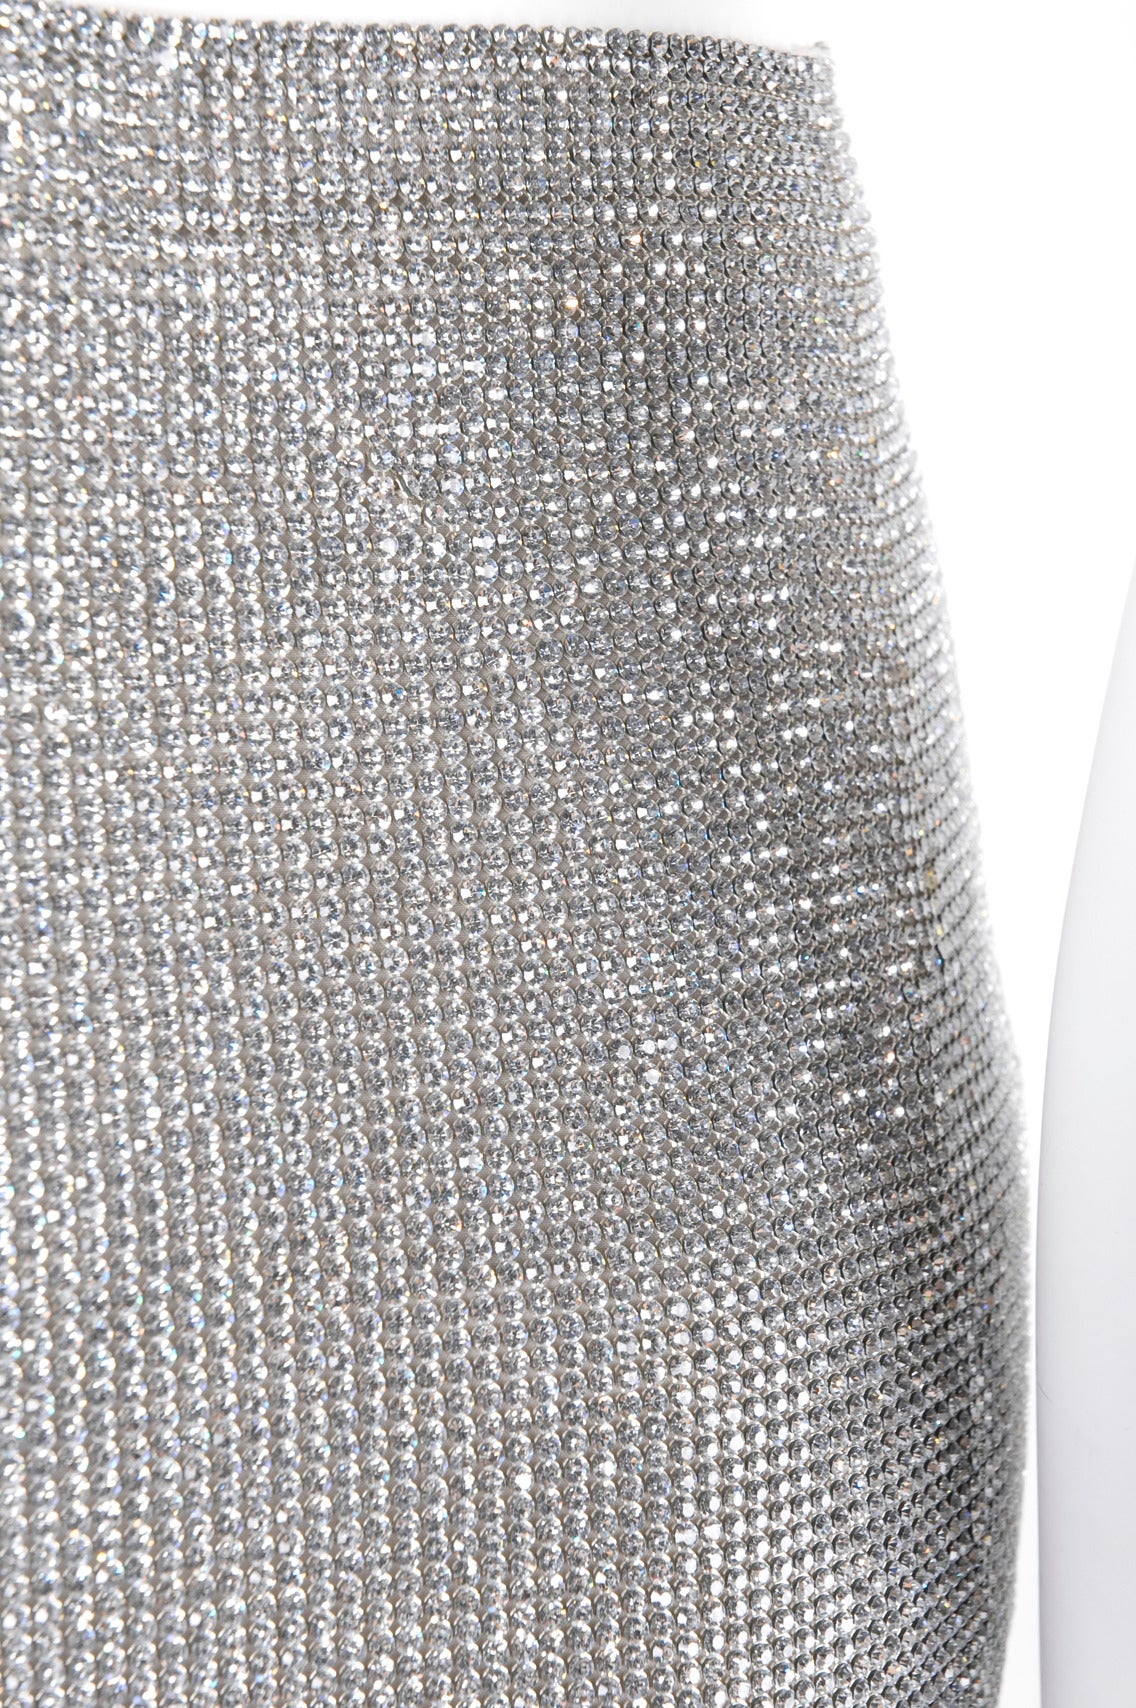 Women's 1996/97 Gianni Versace Couture Rhinestones Skirt as seen on Kate Moss